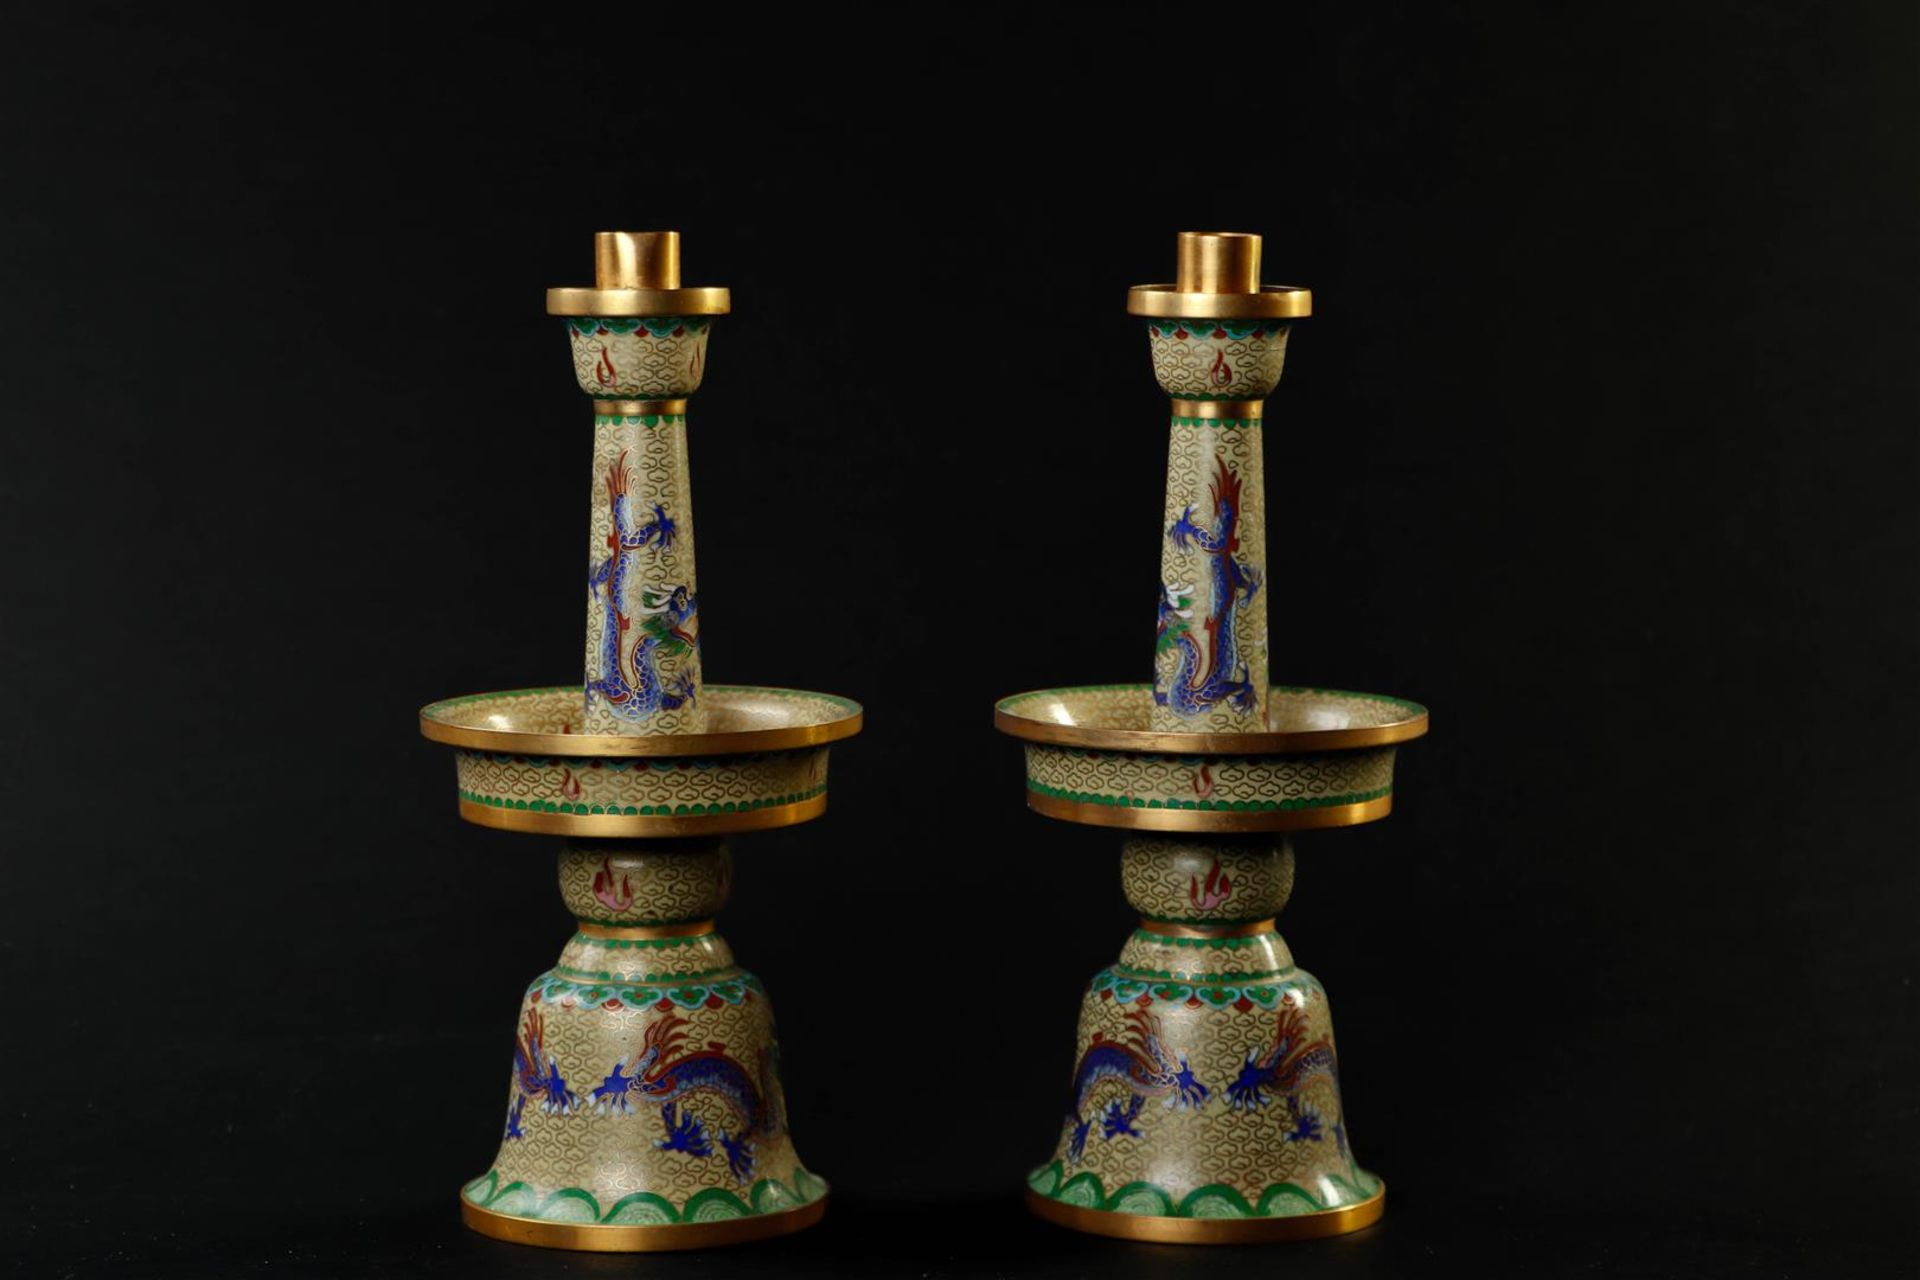 A pair of cloisonne candlesticks decorated with dragons. China, 20th century.
H. 27 cm. - Image 3 of 5